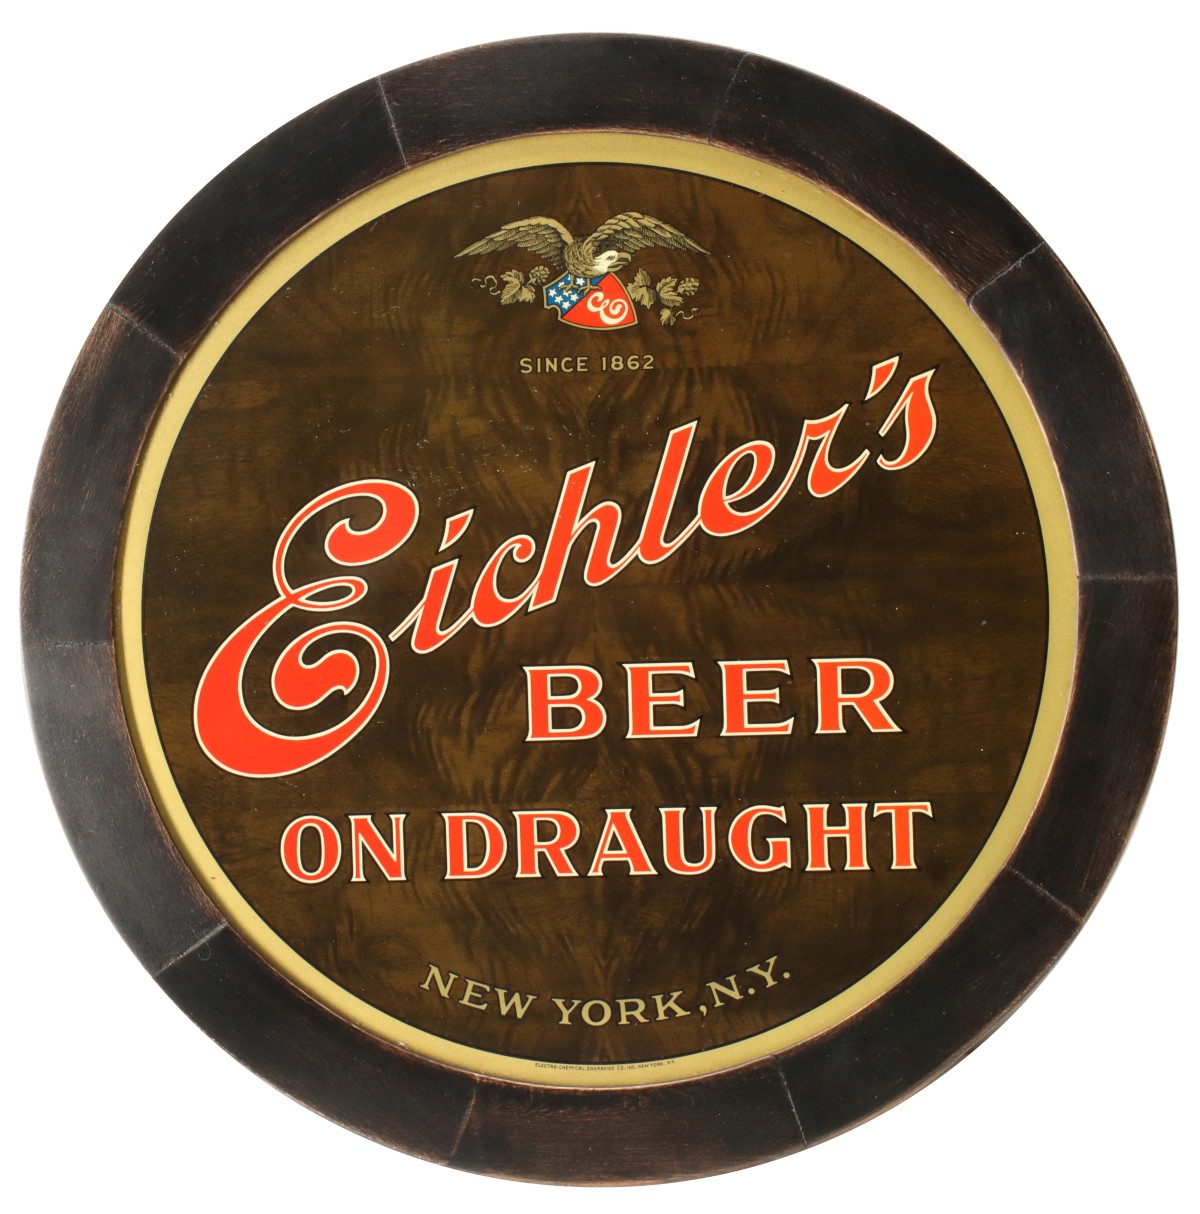 AN EICHLER'S BEER PRE-PROHIBITION TIN ADVERTISING SIGN